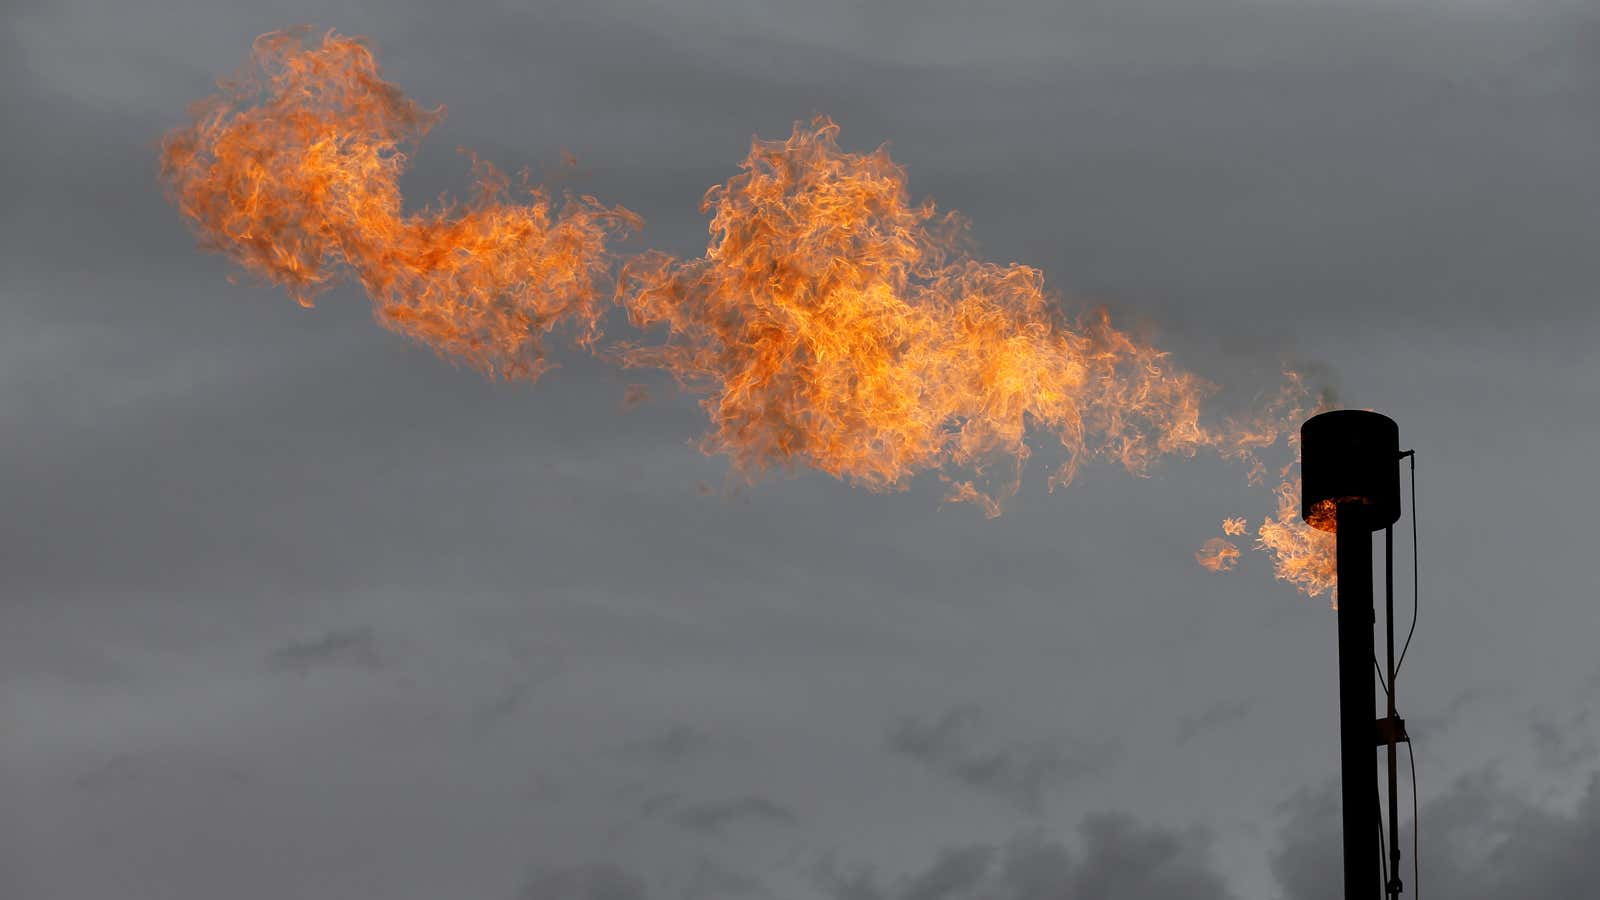 By lagging the world in methane monitoring, the US risks being shut out of the global gas market.